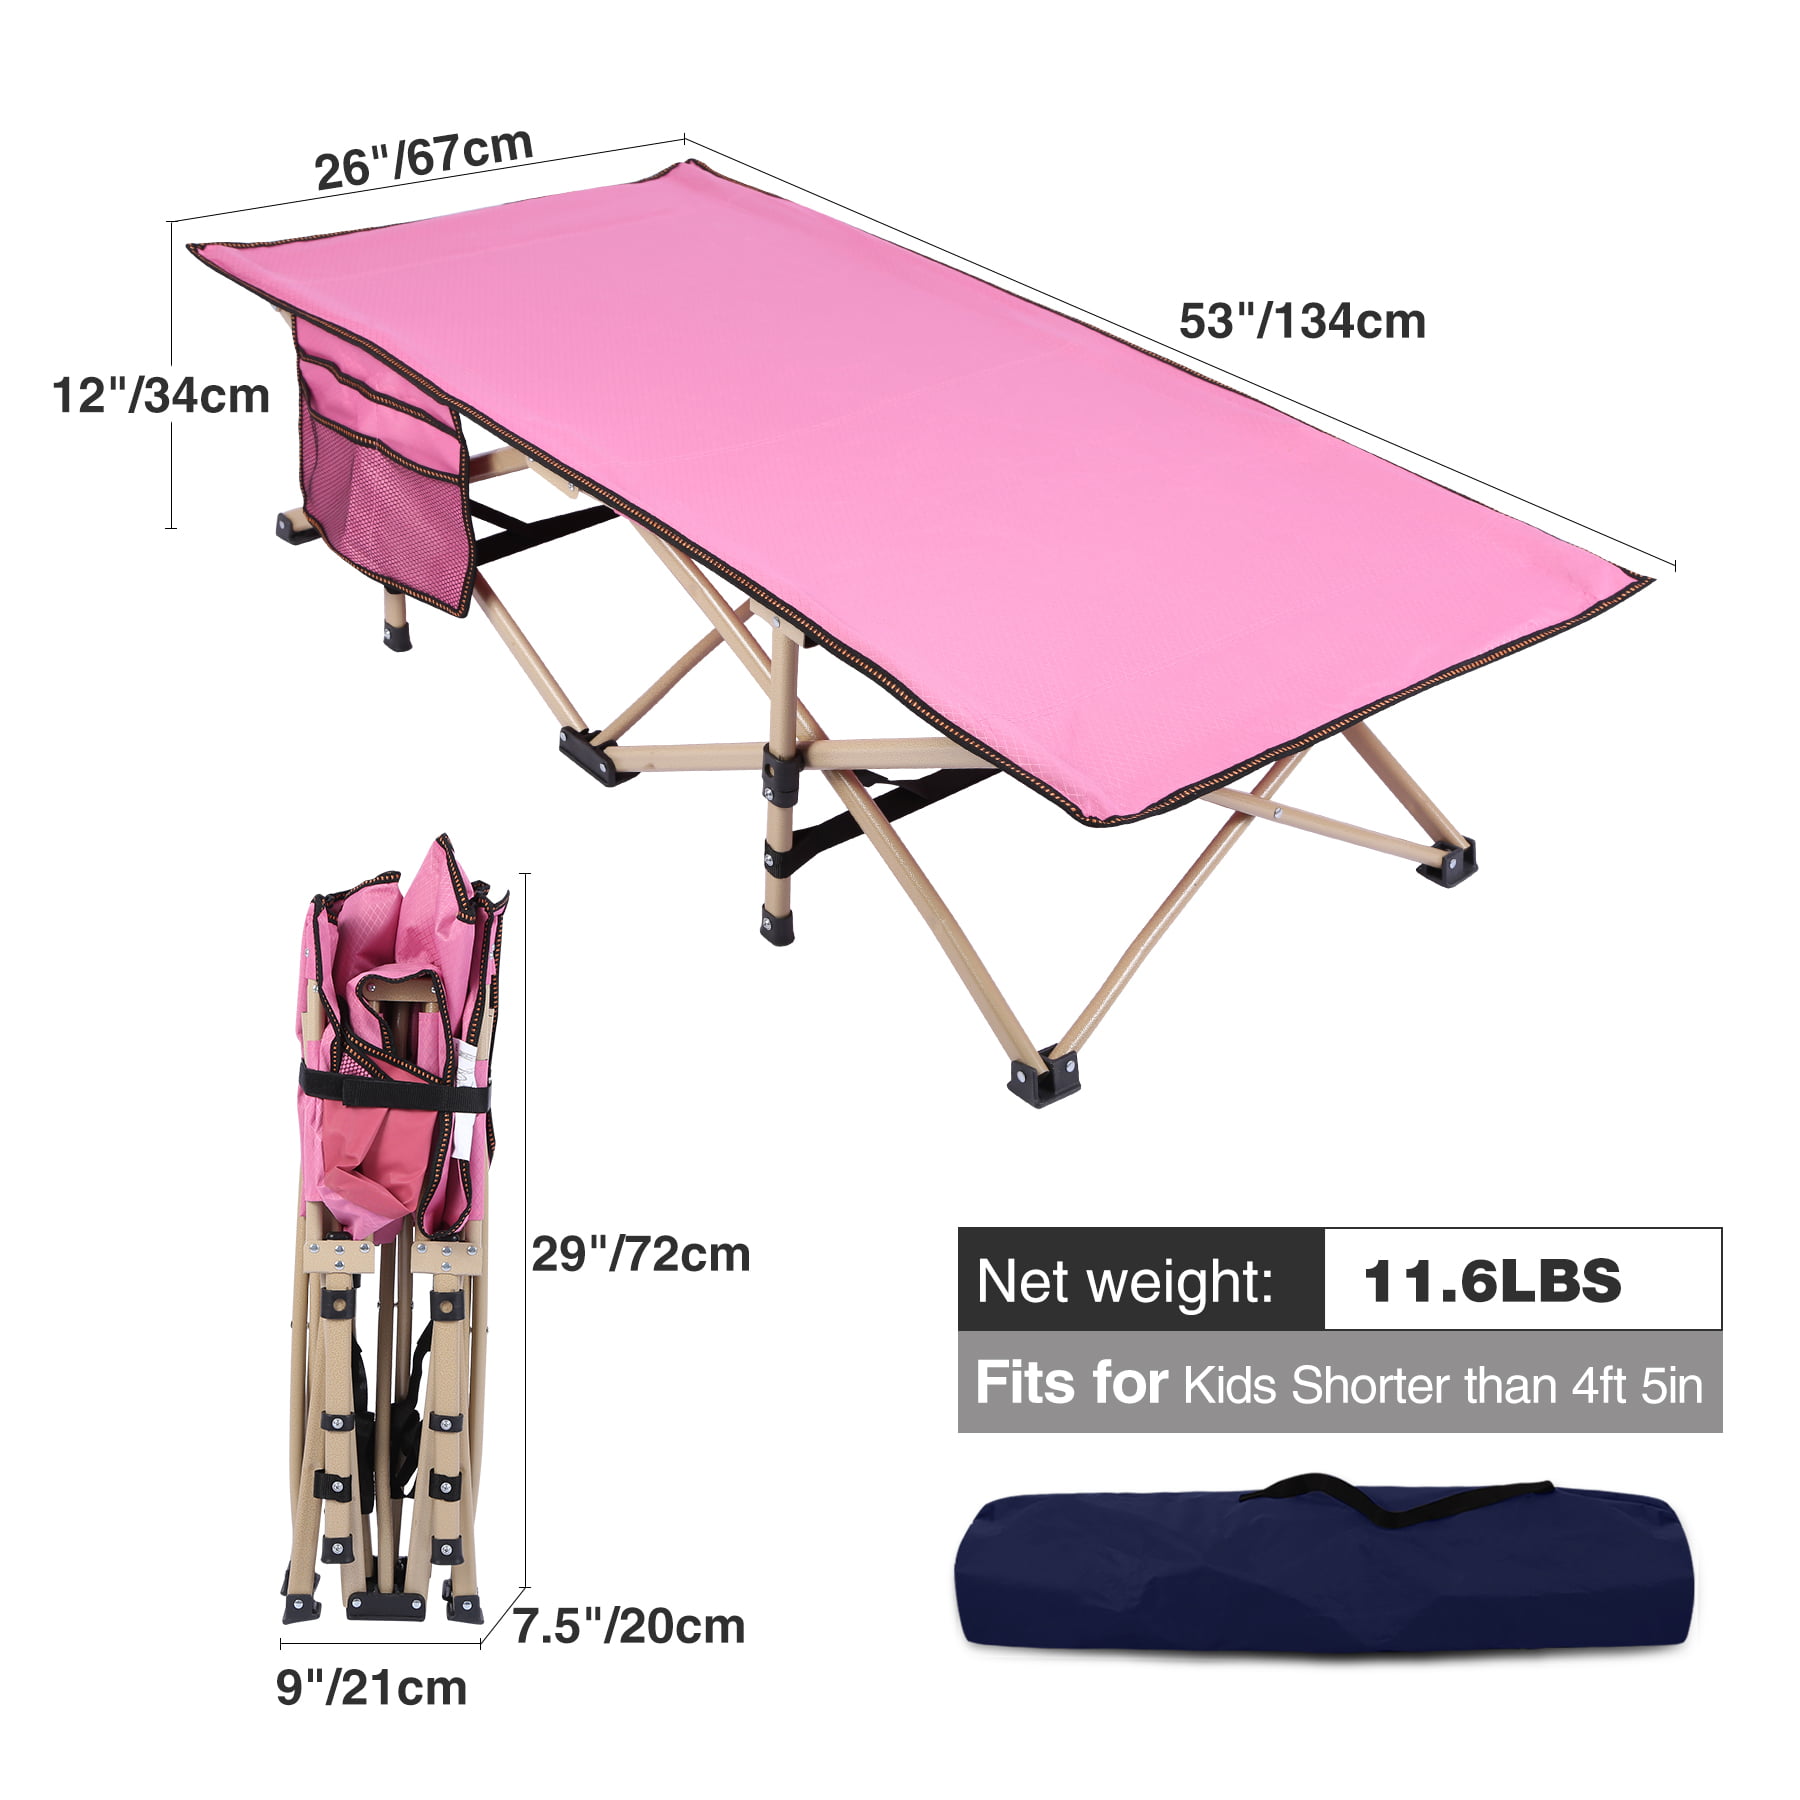 Portable with Carry Bag Sturdy Steel Folding Toddler Cot Bed for Travel Sleeping Pink REDCAMP Extra Long Kids Cot for Camping with Sleeping Bag 